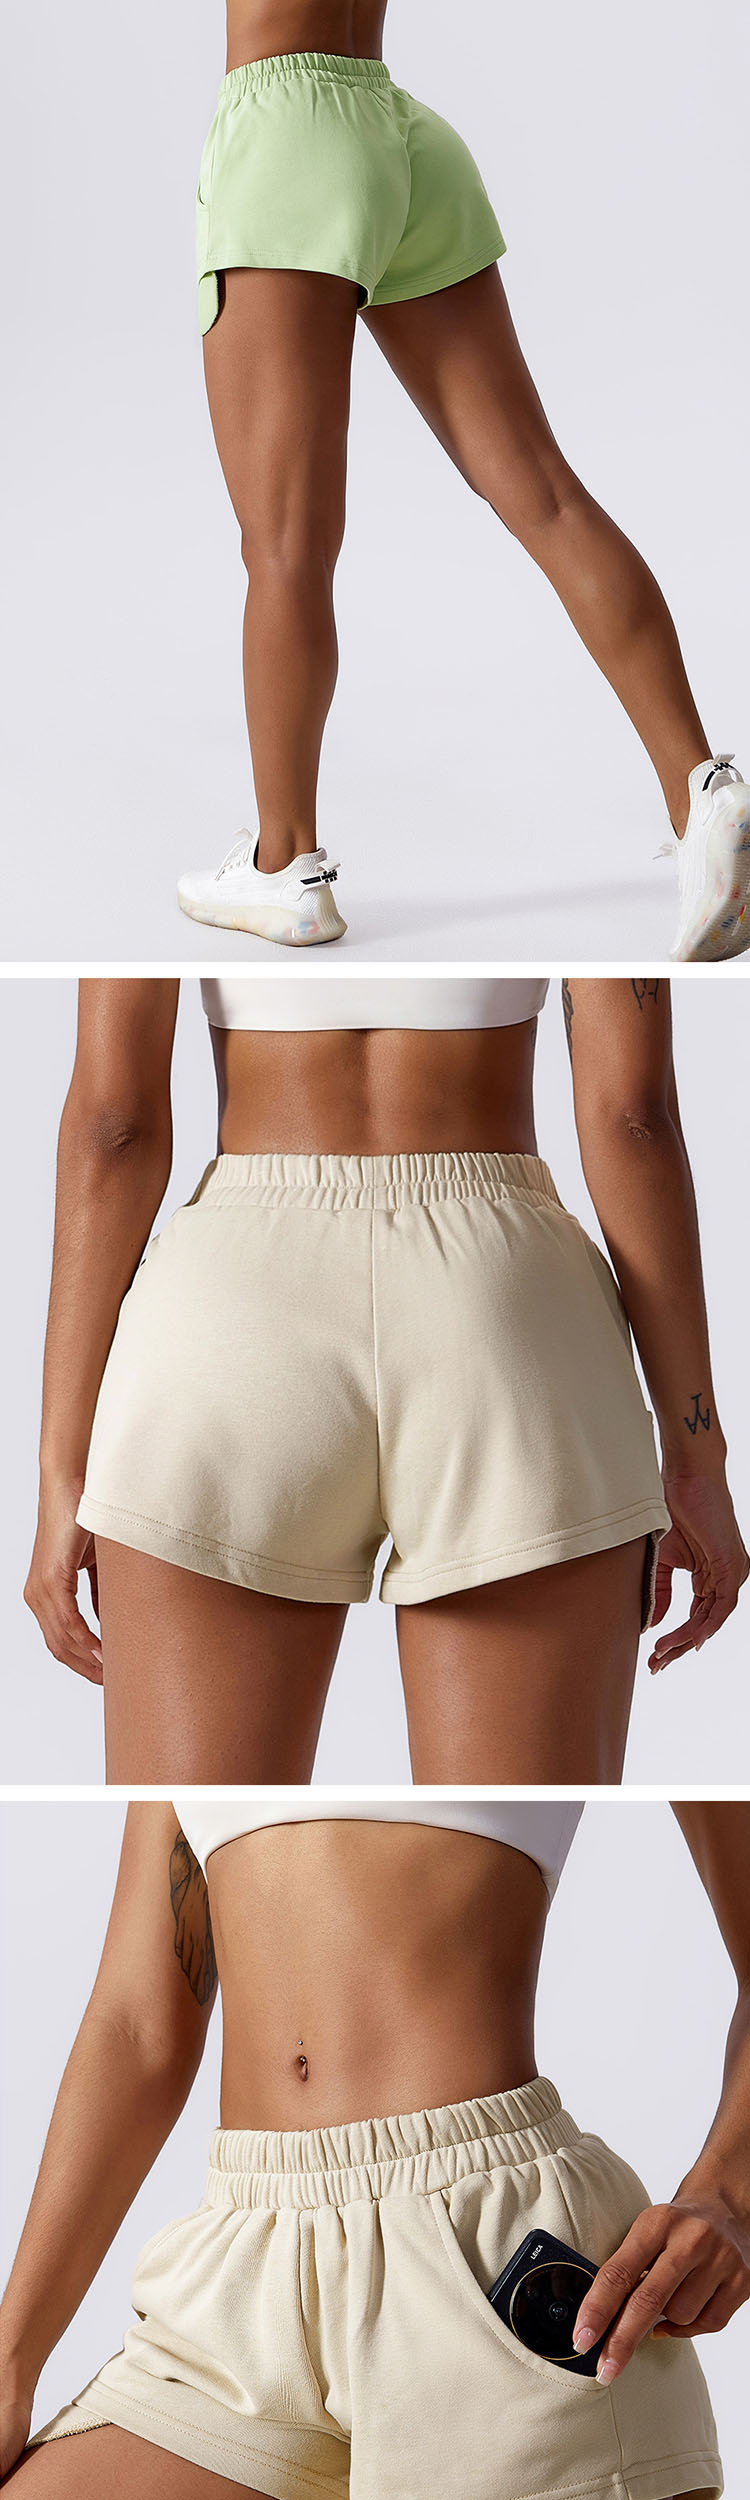 Elastic waist design is adopted, which is convenient to put on and take off